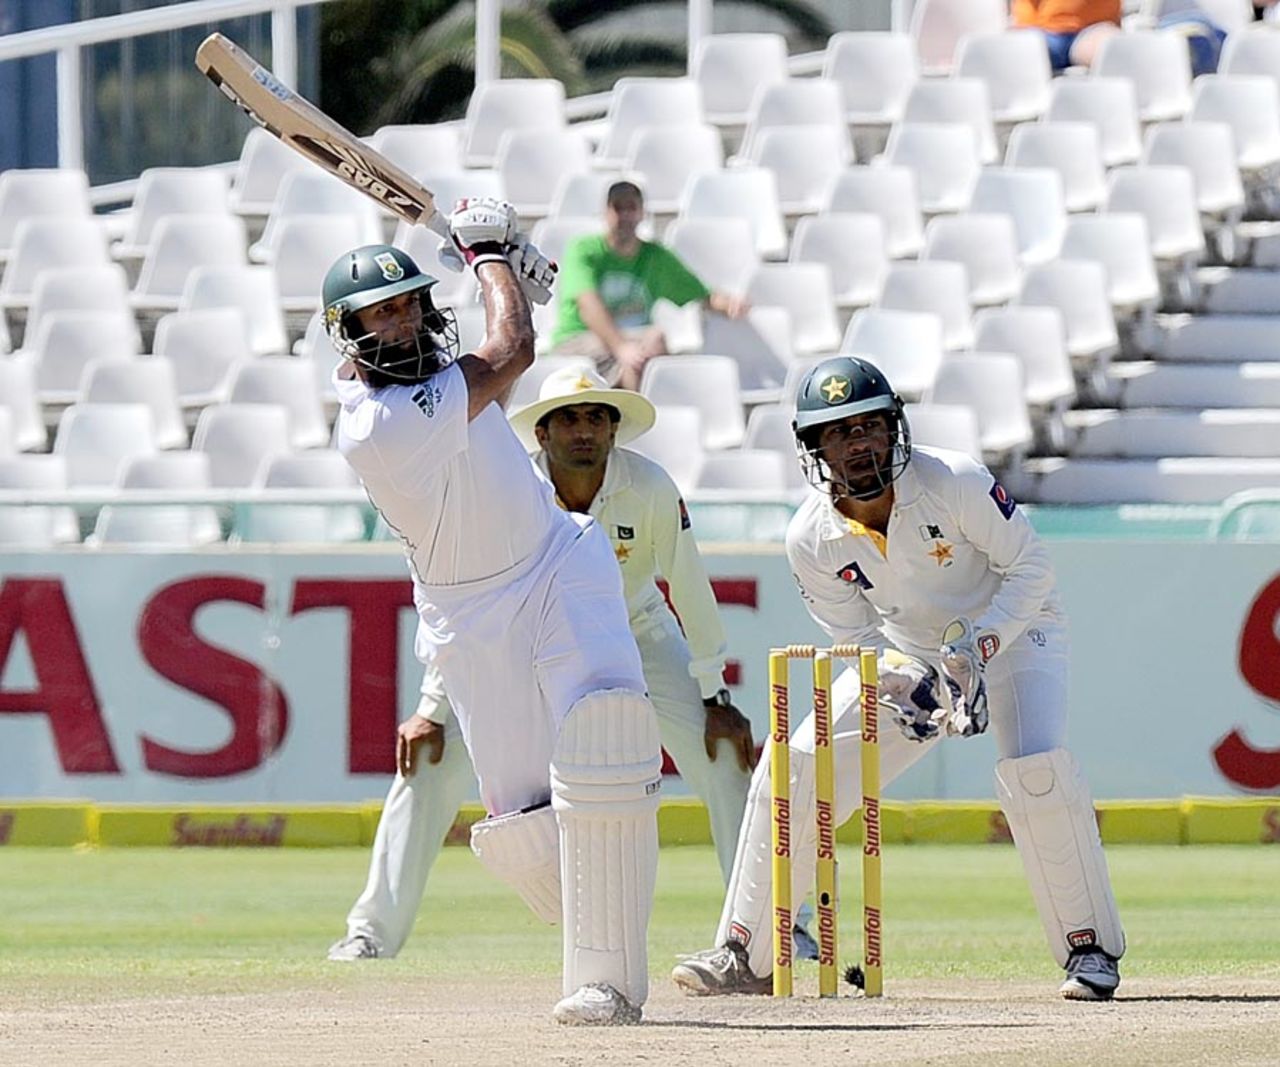 Hashim Amla plays an attacking stroke, South Africa v Pakistan, 2nd Test, Cape Town, 4th day, February 17, 2013